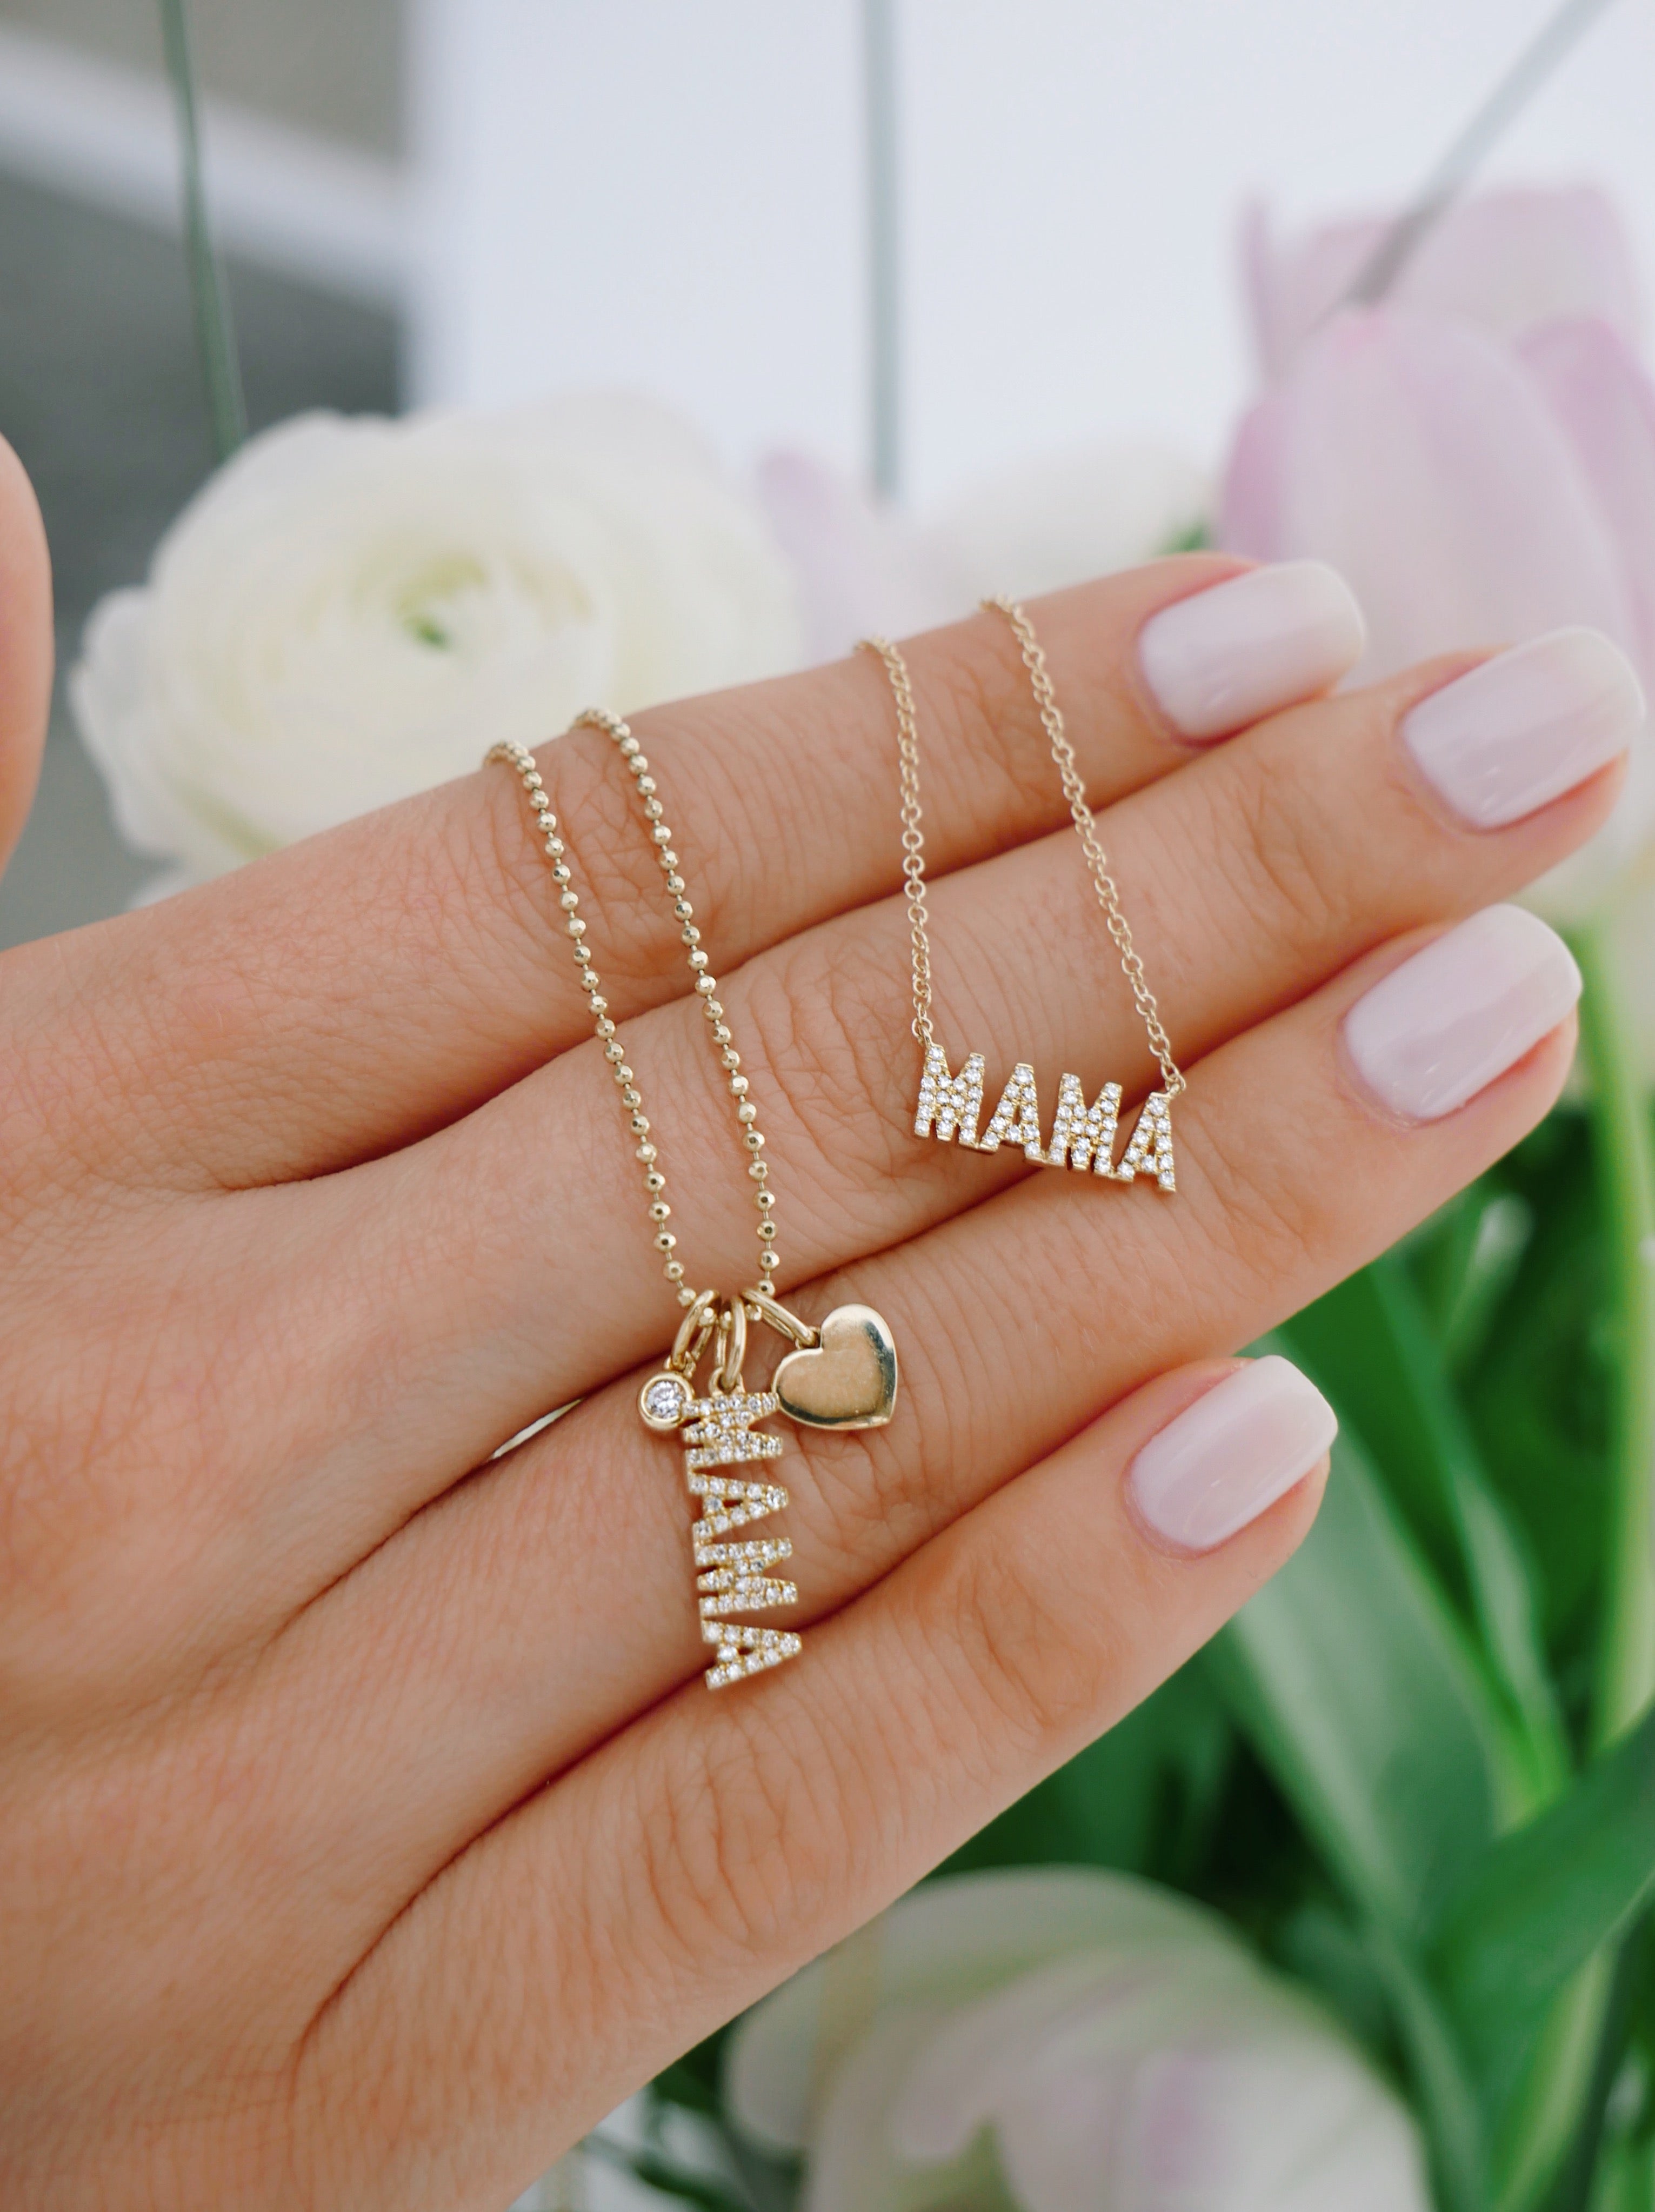 Diamond Mama Necklace for Women - 14k Real Gold Mother Daughter Necklaces -  Mom Letter Pendant Necklace - Delicate Diamond Jewelry - Christmas Gifts –  Gelin Diamond